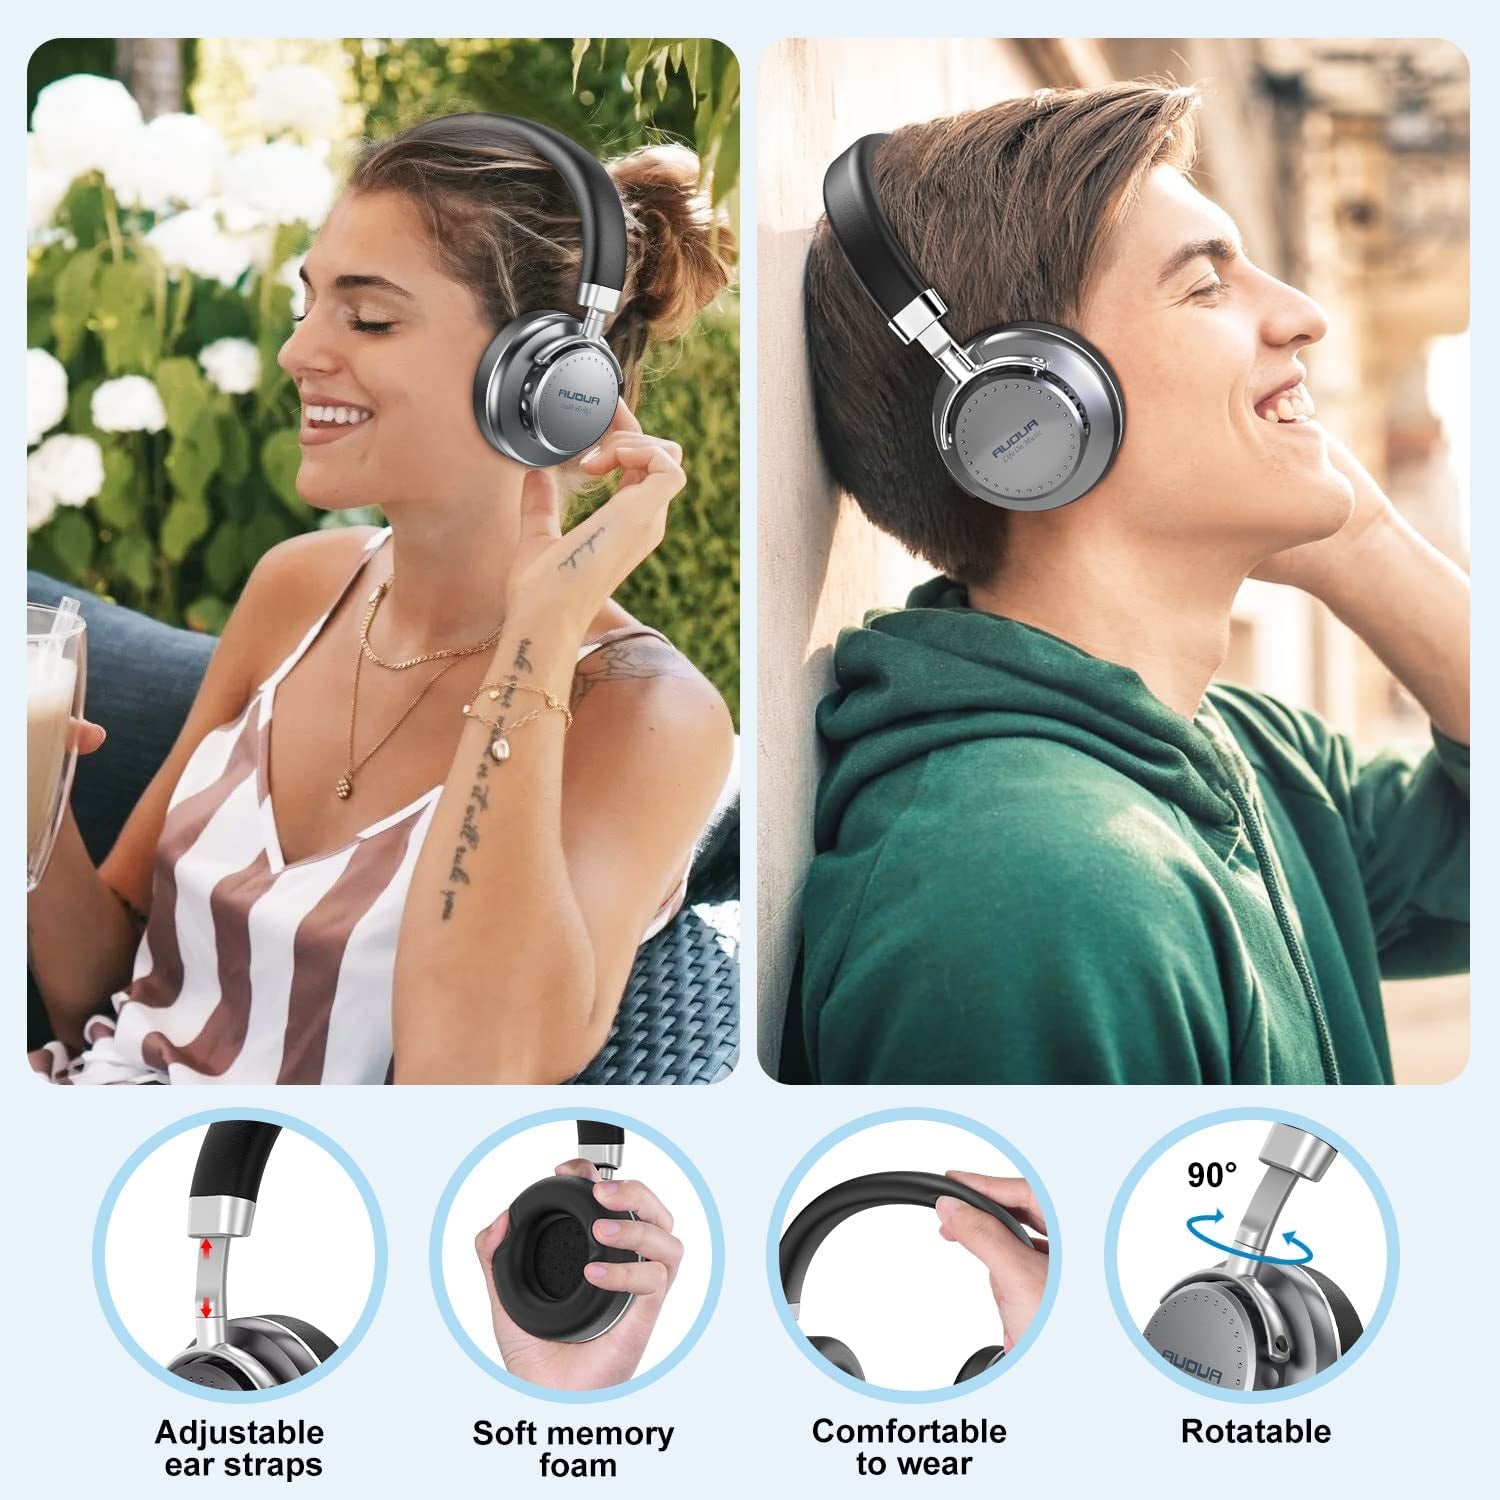 Rechargeable Wireless Bluetooth Headphones, Hifi Stereo Over Ear Headphones with Mic, 35H Playtime , Adjustable Flip Function Lightweight Wired Headphones with Soft Memory Foam Ear-pads for Cell Phones, iPad, PC, Laptop